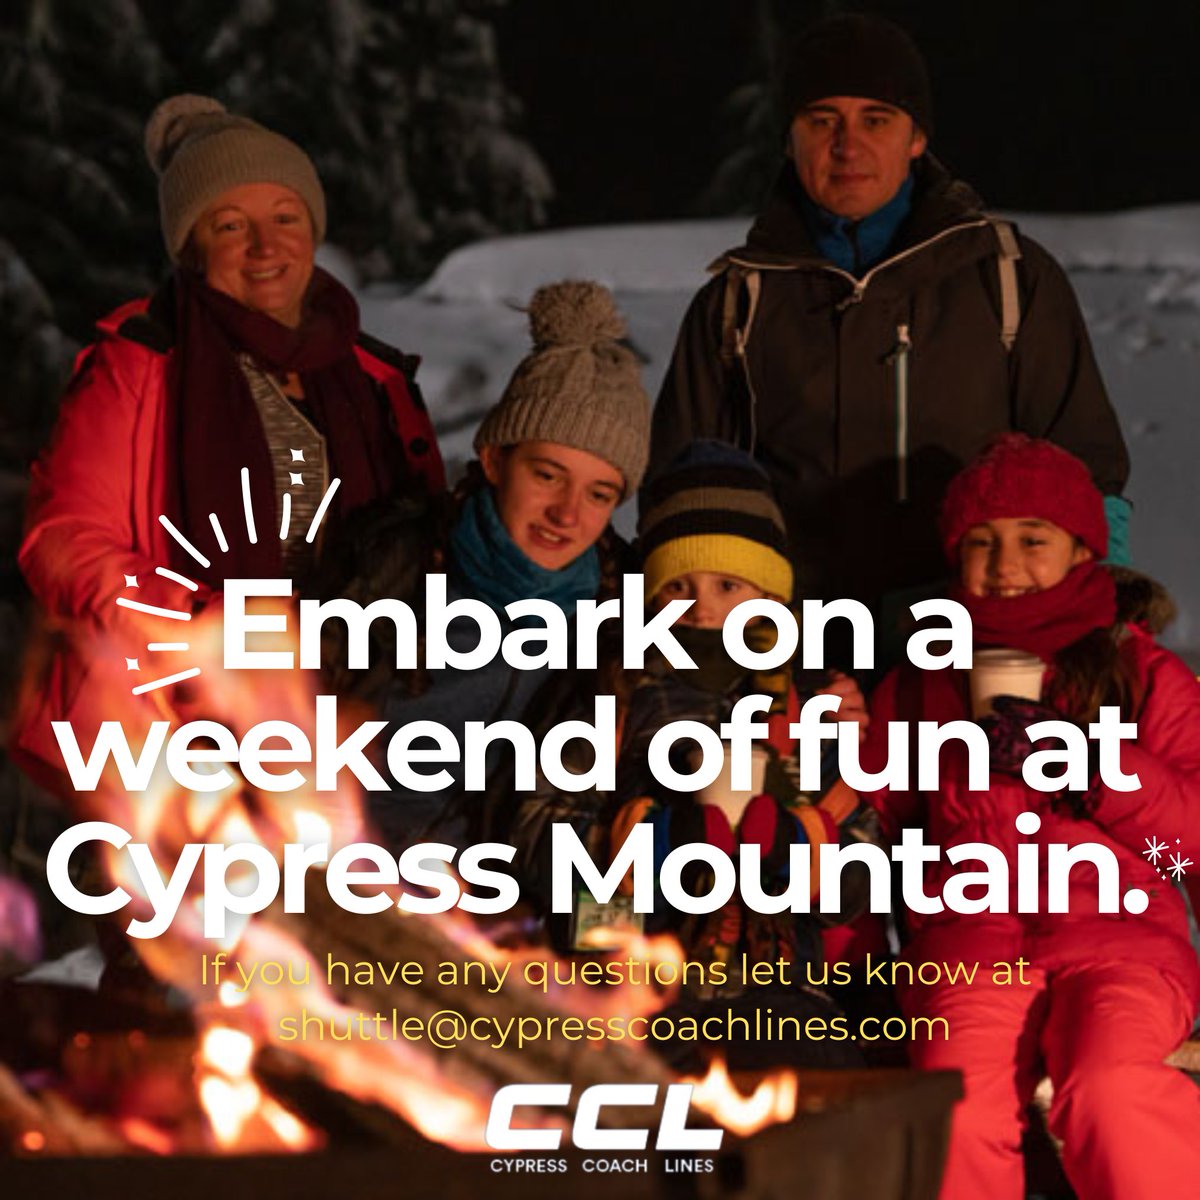 #CypressMountain has your weekend covered with Family Friday Nights, the Hollyburn Nights on Saturdays, or even Cypress Sundays with a comfortable #CypressCoachLines ride! 

 BOOK ONLINE TODAY! bit.ly/3Inqoyw

#trip #bus #bustrip #vancouver #travelsafe #relax #nature